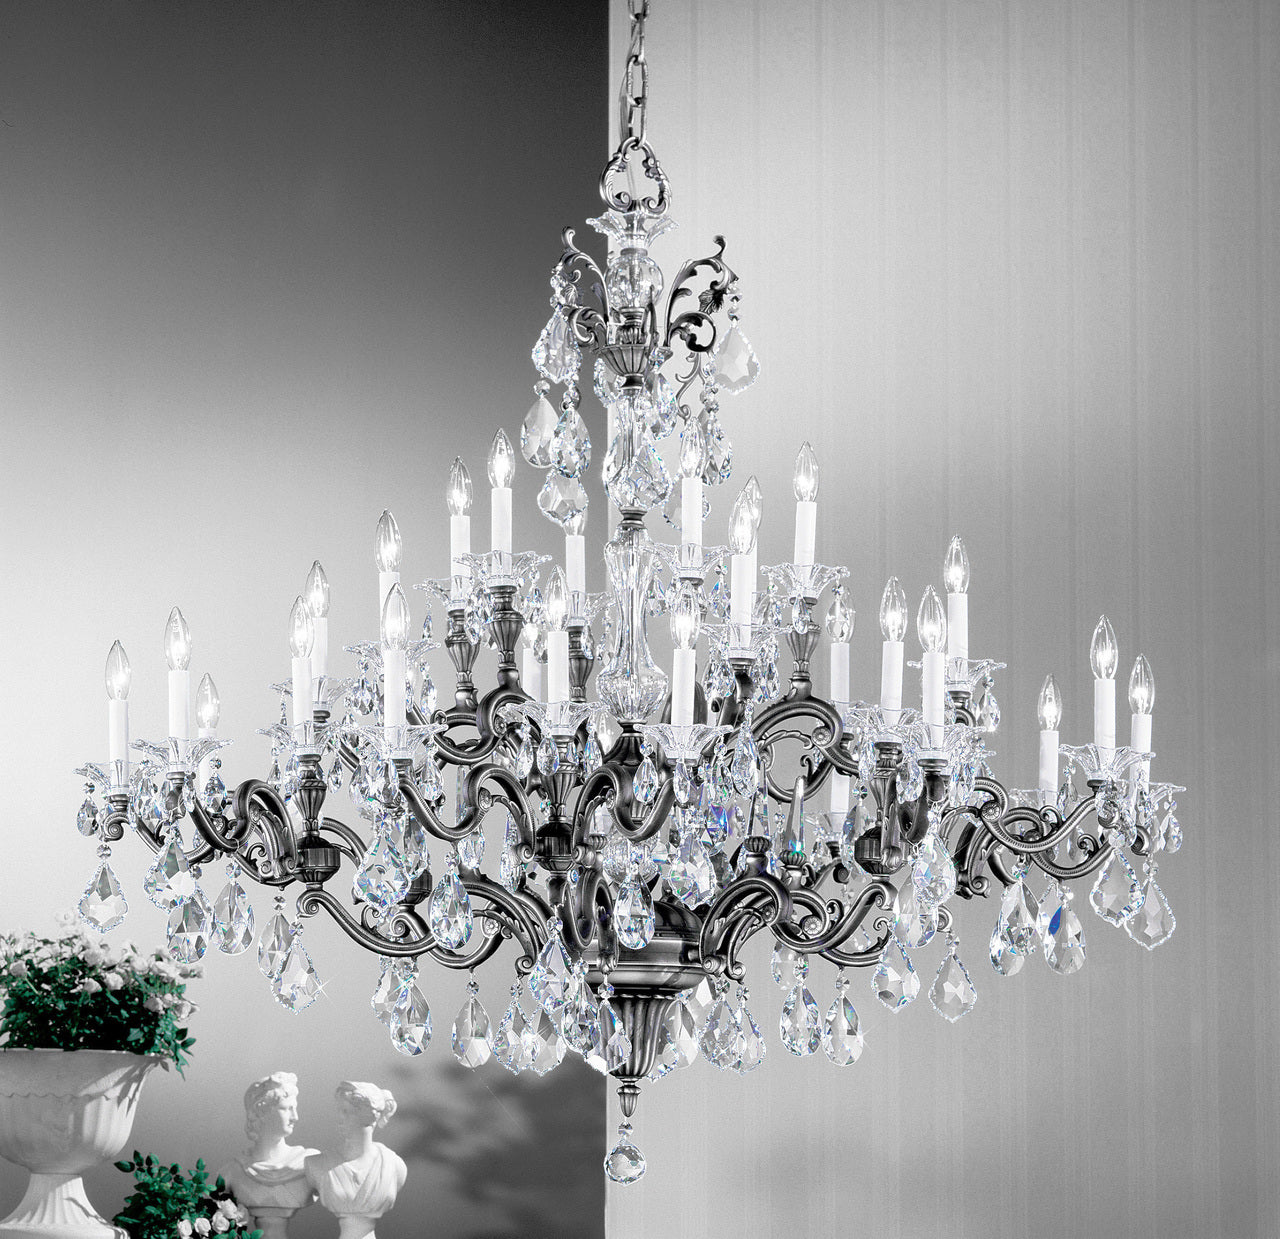 Classic Lighting 57130 MS C Via Firenze Crystal Chandelier in Millennium Silver (Imported from Spain)